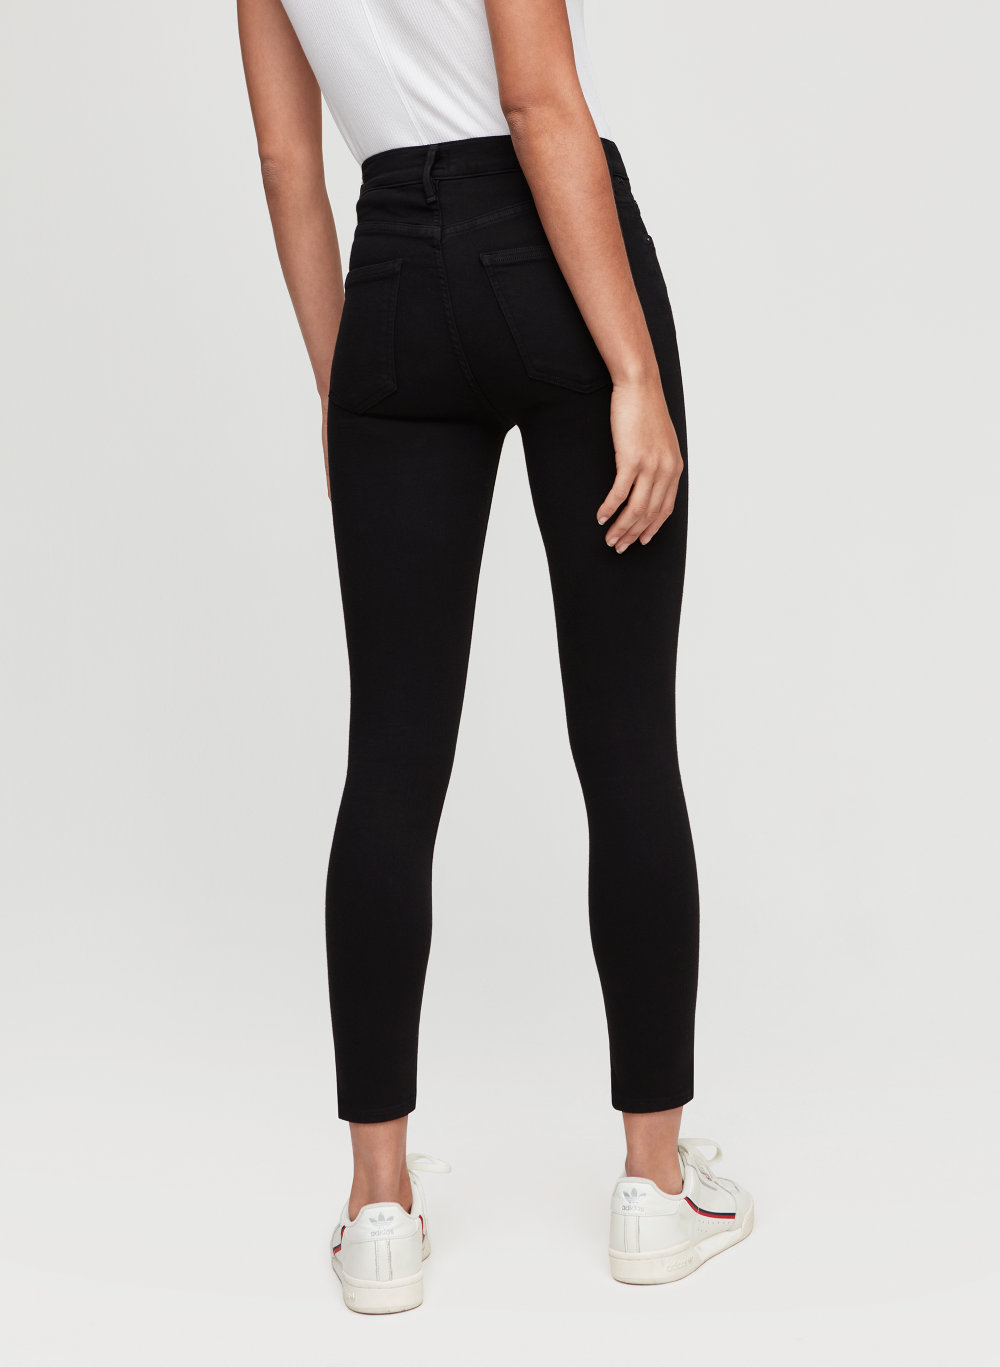 citizens of humanity black jeans